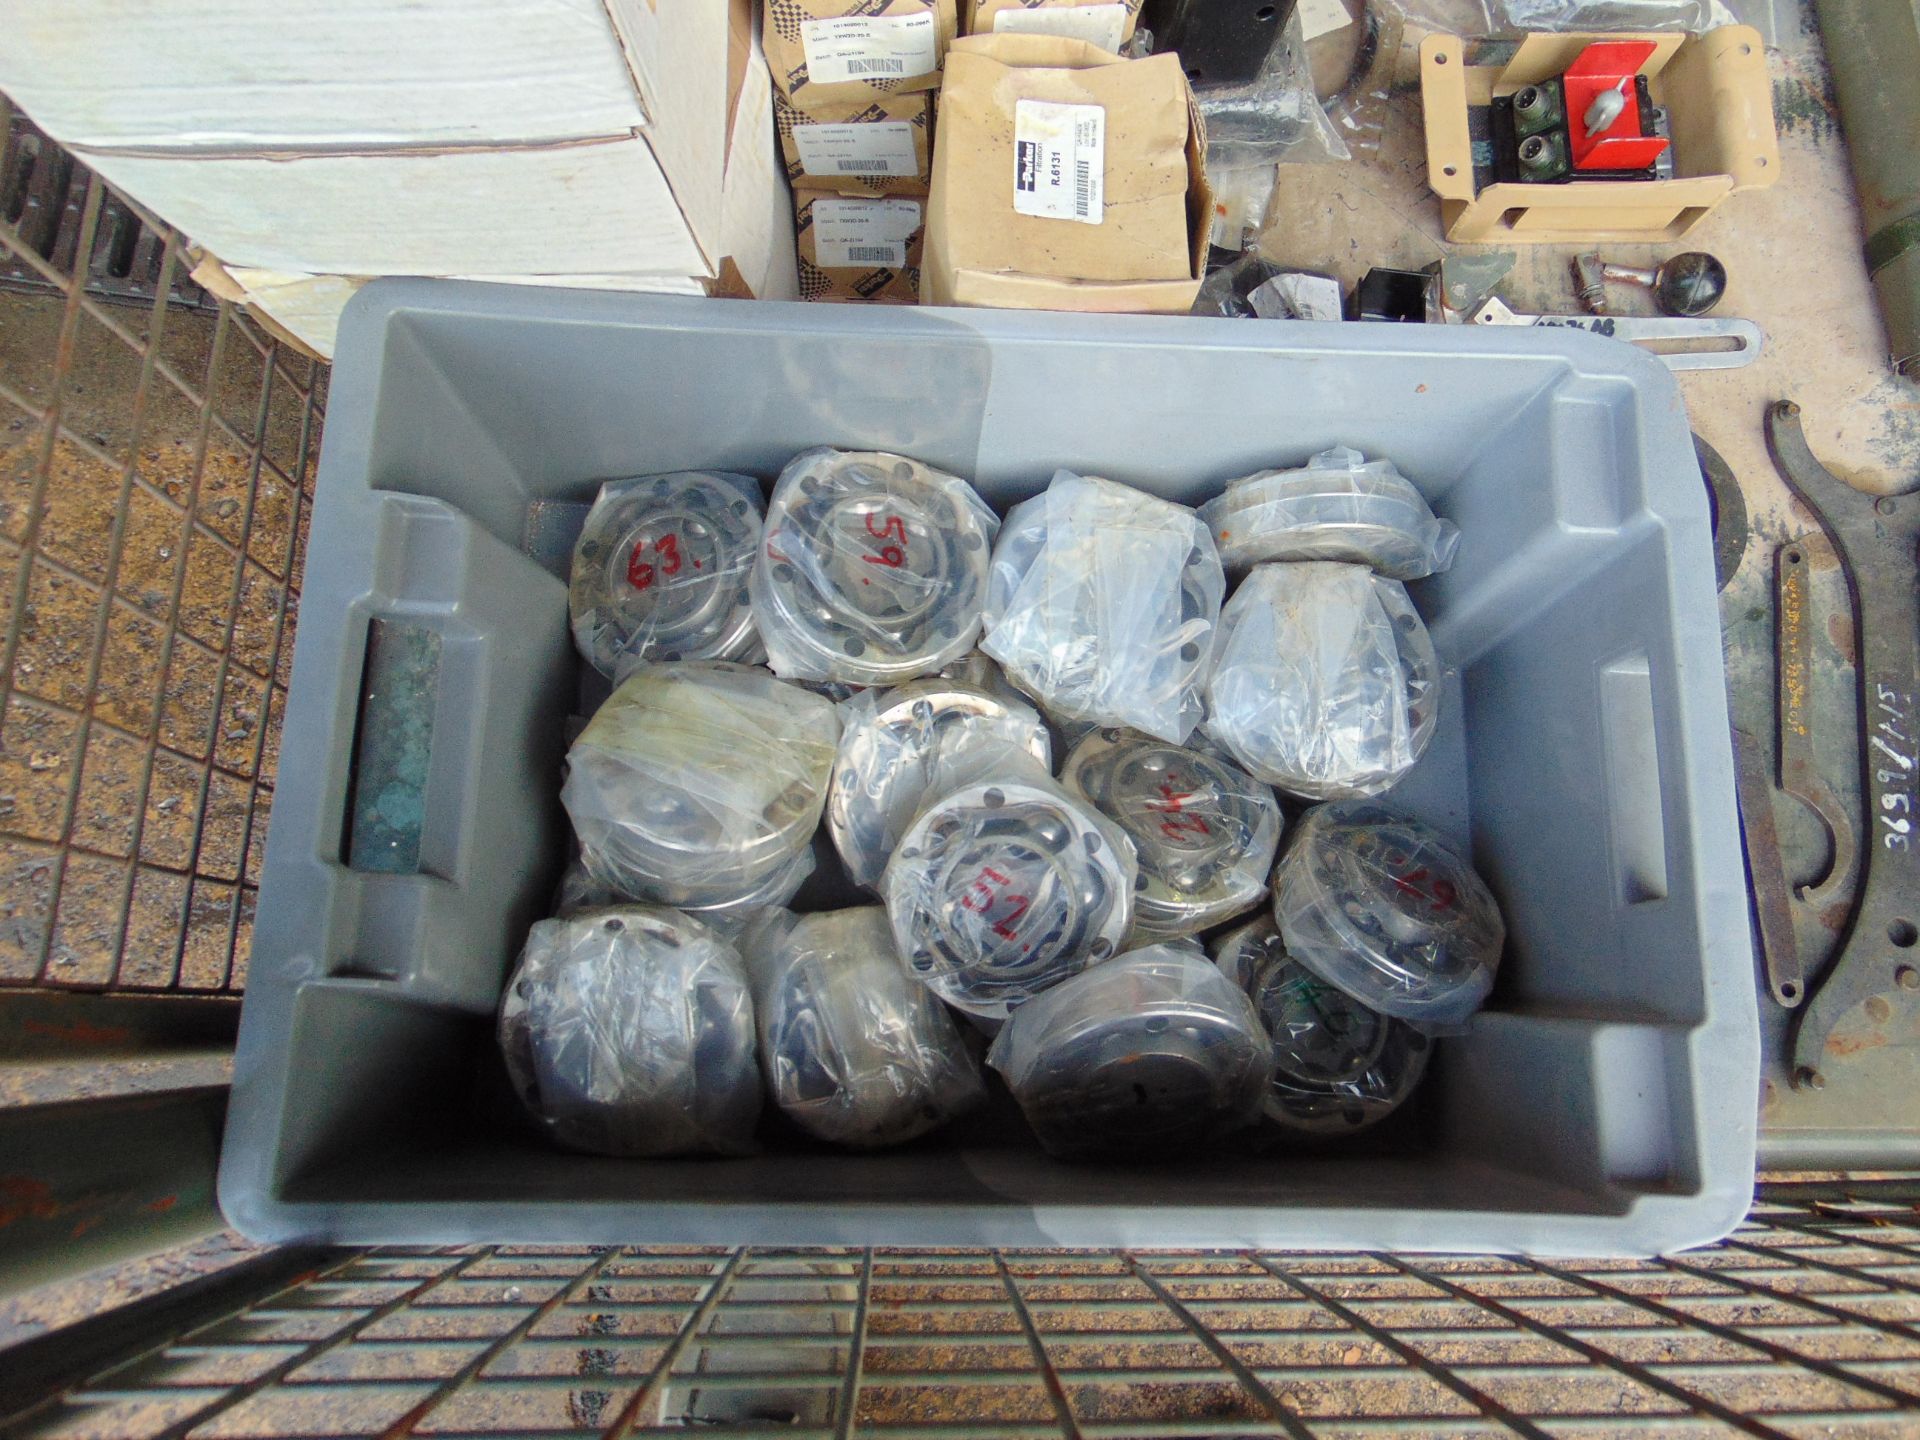 1 x Stillage of Tools, Bearings, Mirrors Filters etc - Image 5 of 8